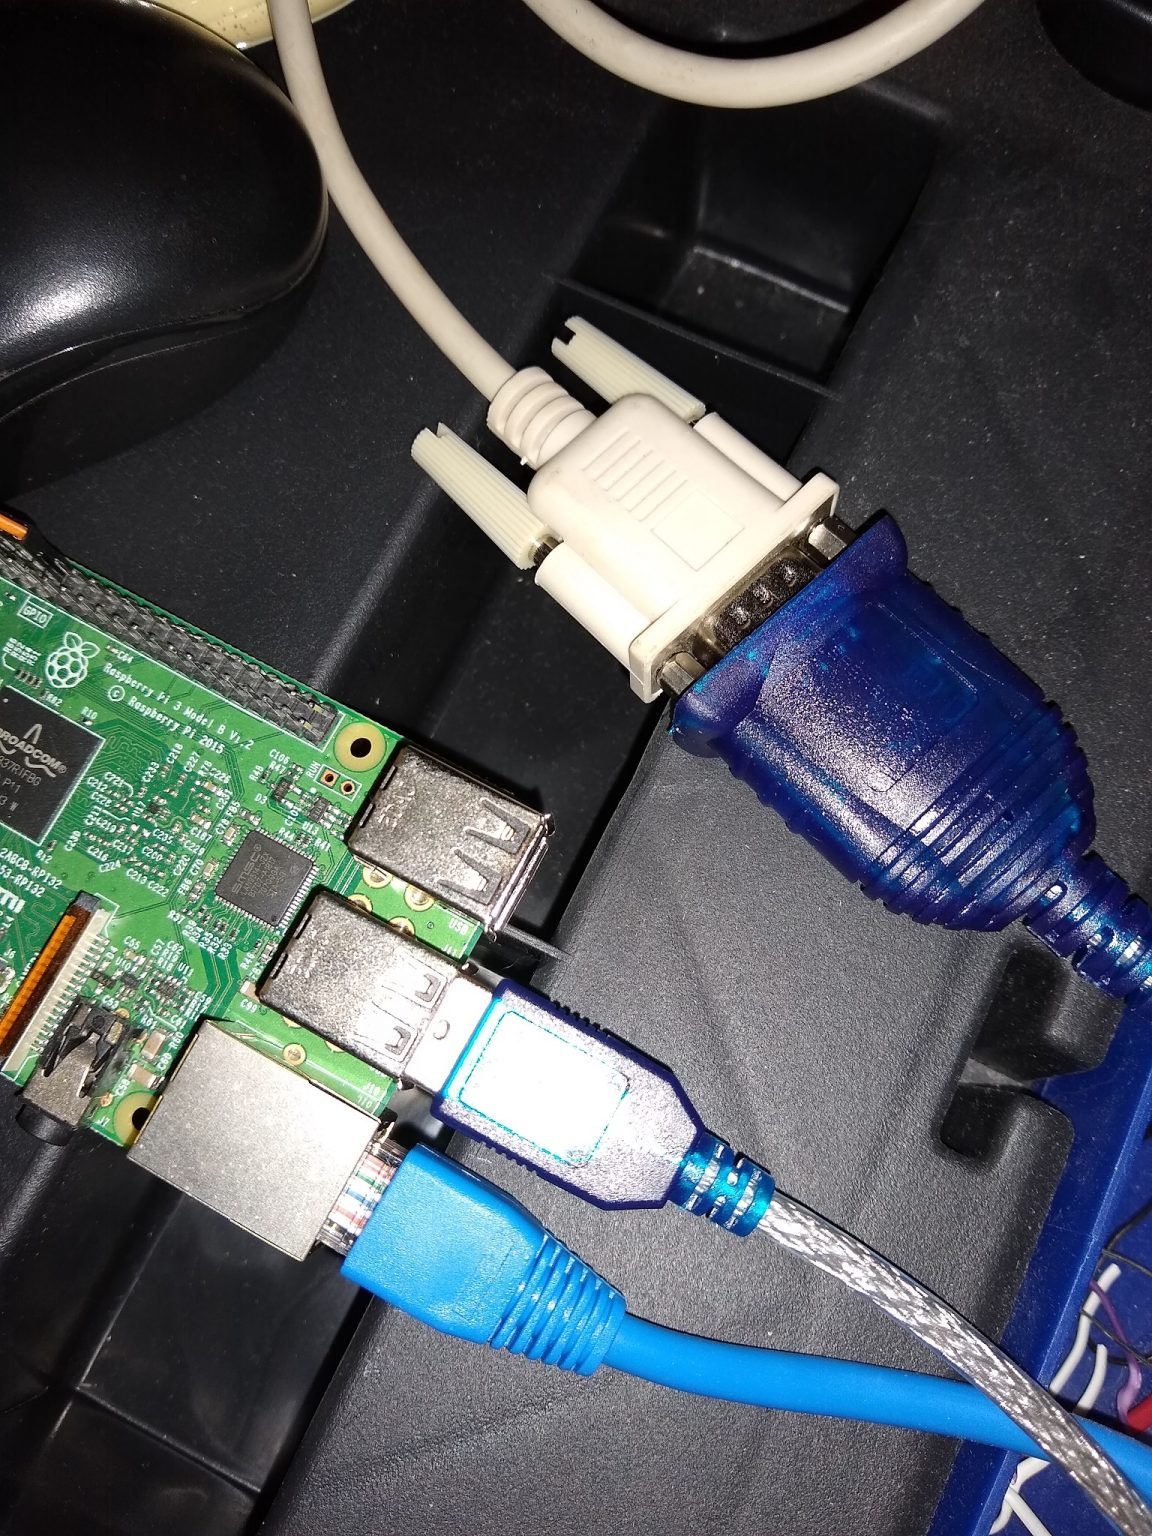 The USB Serial adapter plugged into the Pi.